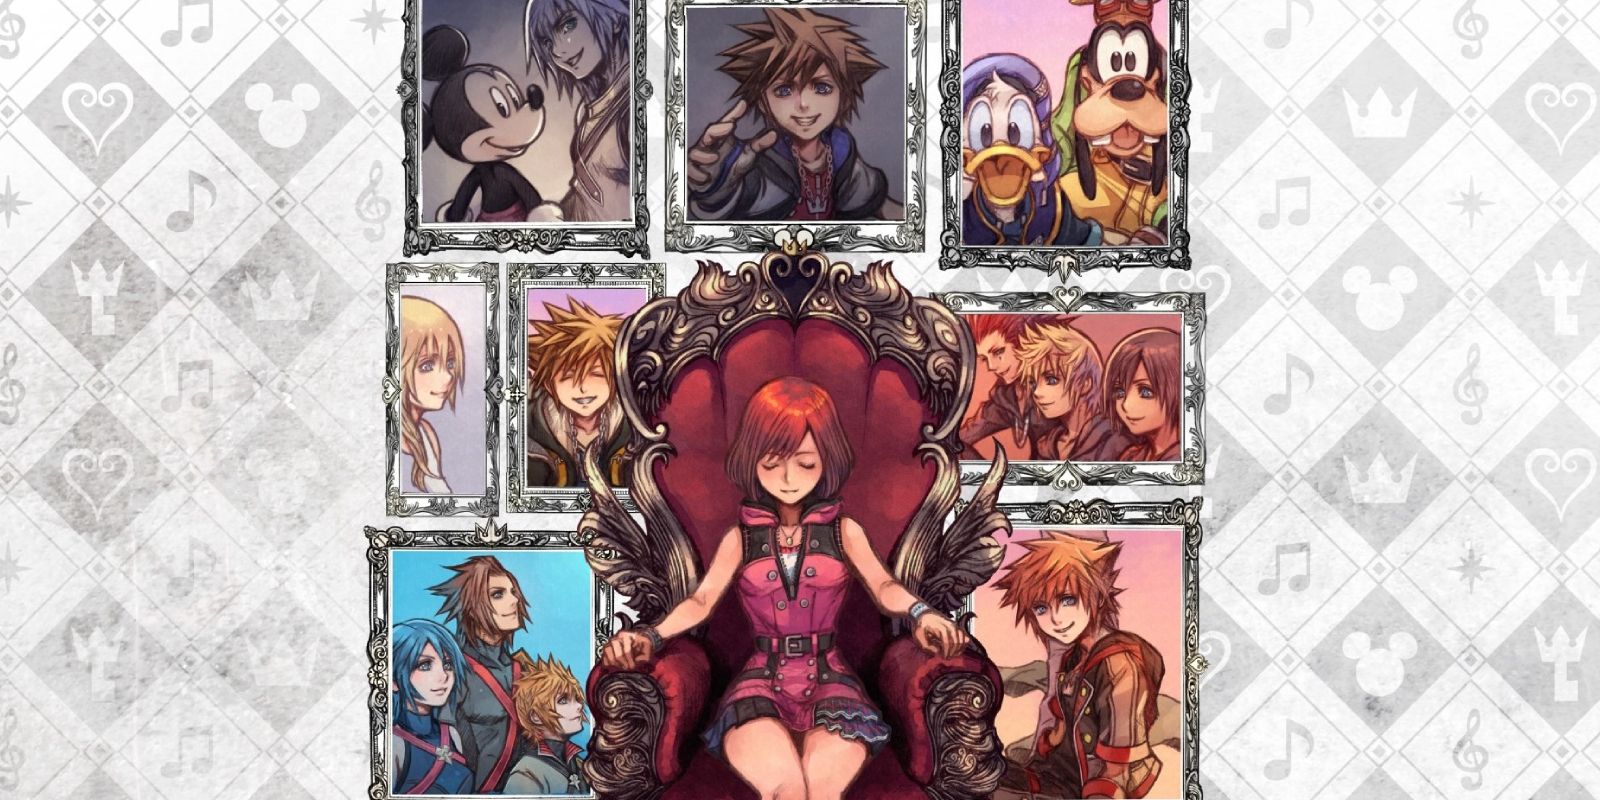 Every Kingdom Hearts Game Ranked From Worst To Best